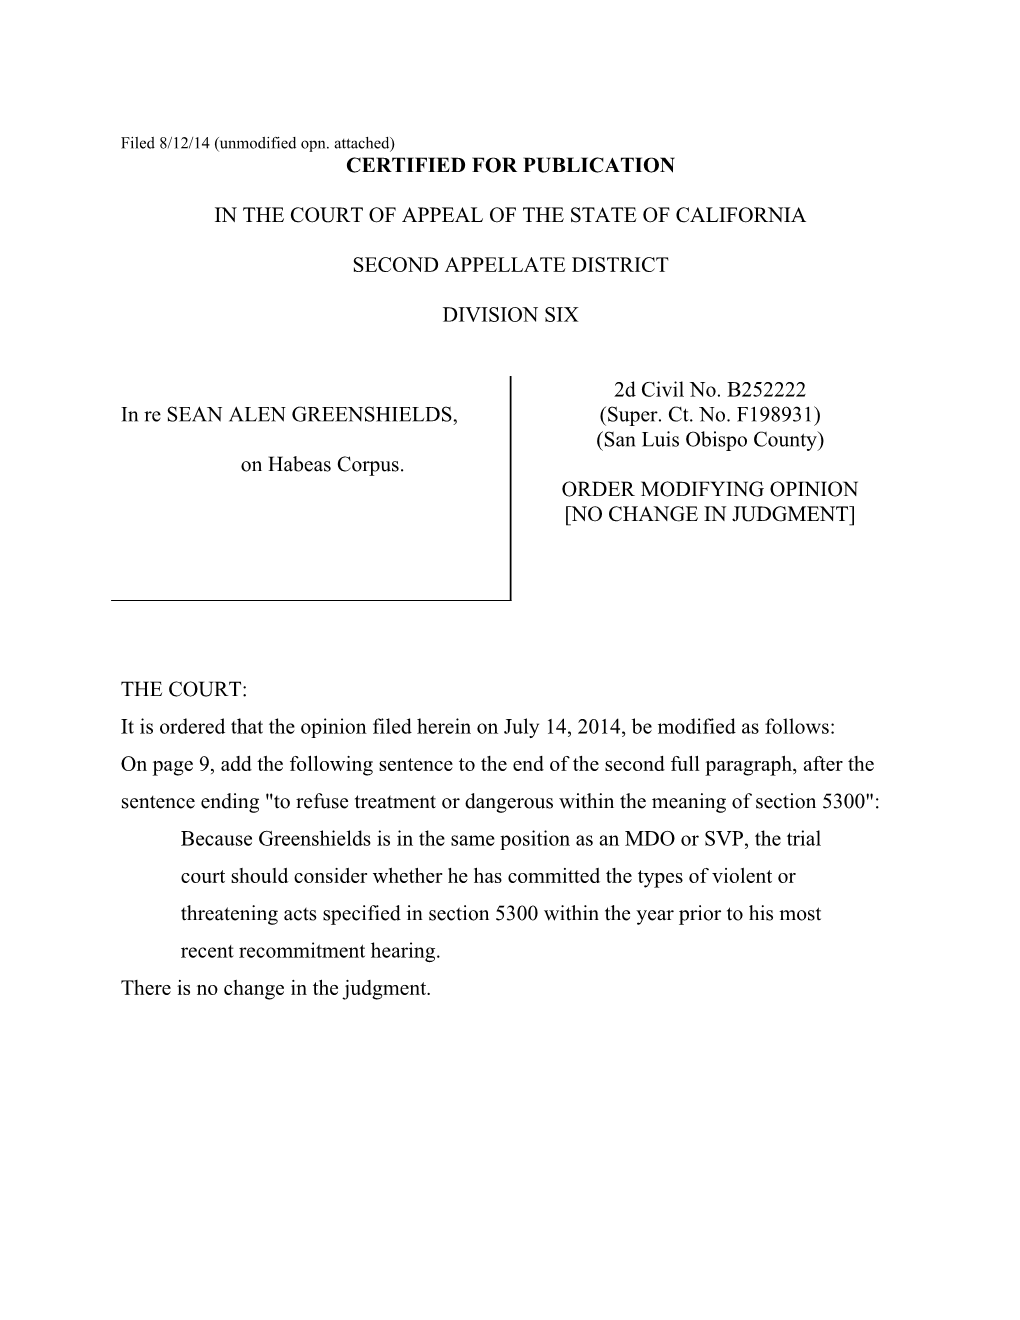 Filed 8/12/14 (Unmodified Opn. Attached)